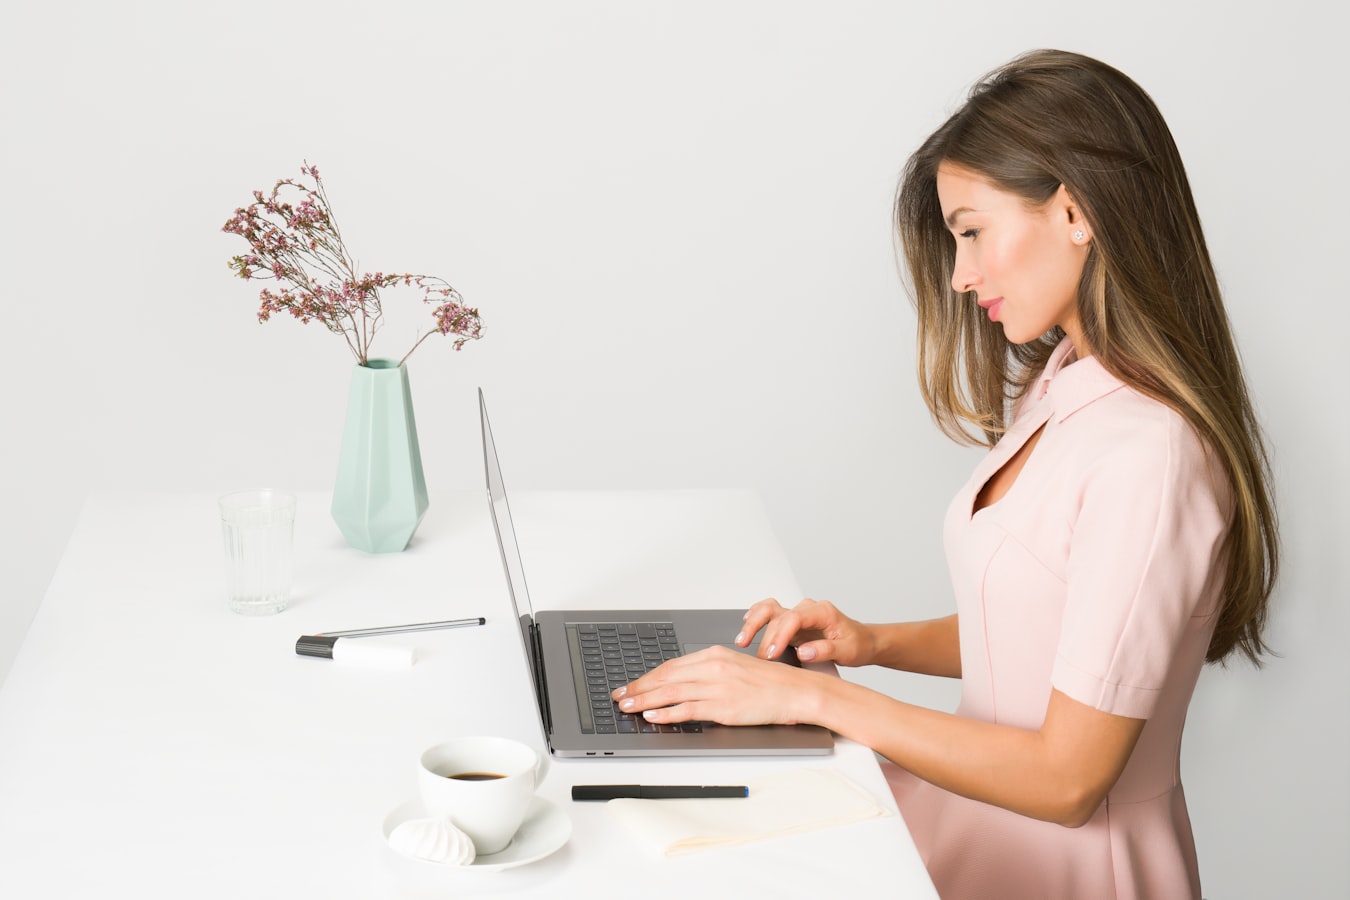 Woman with long brown hair wearing a pink dress typing on a laptop with cup of coffee and vase of flowers nearby